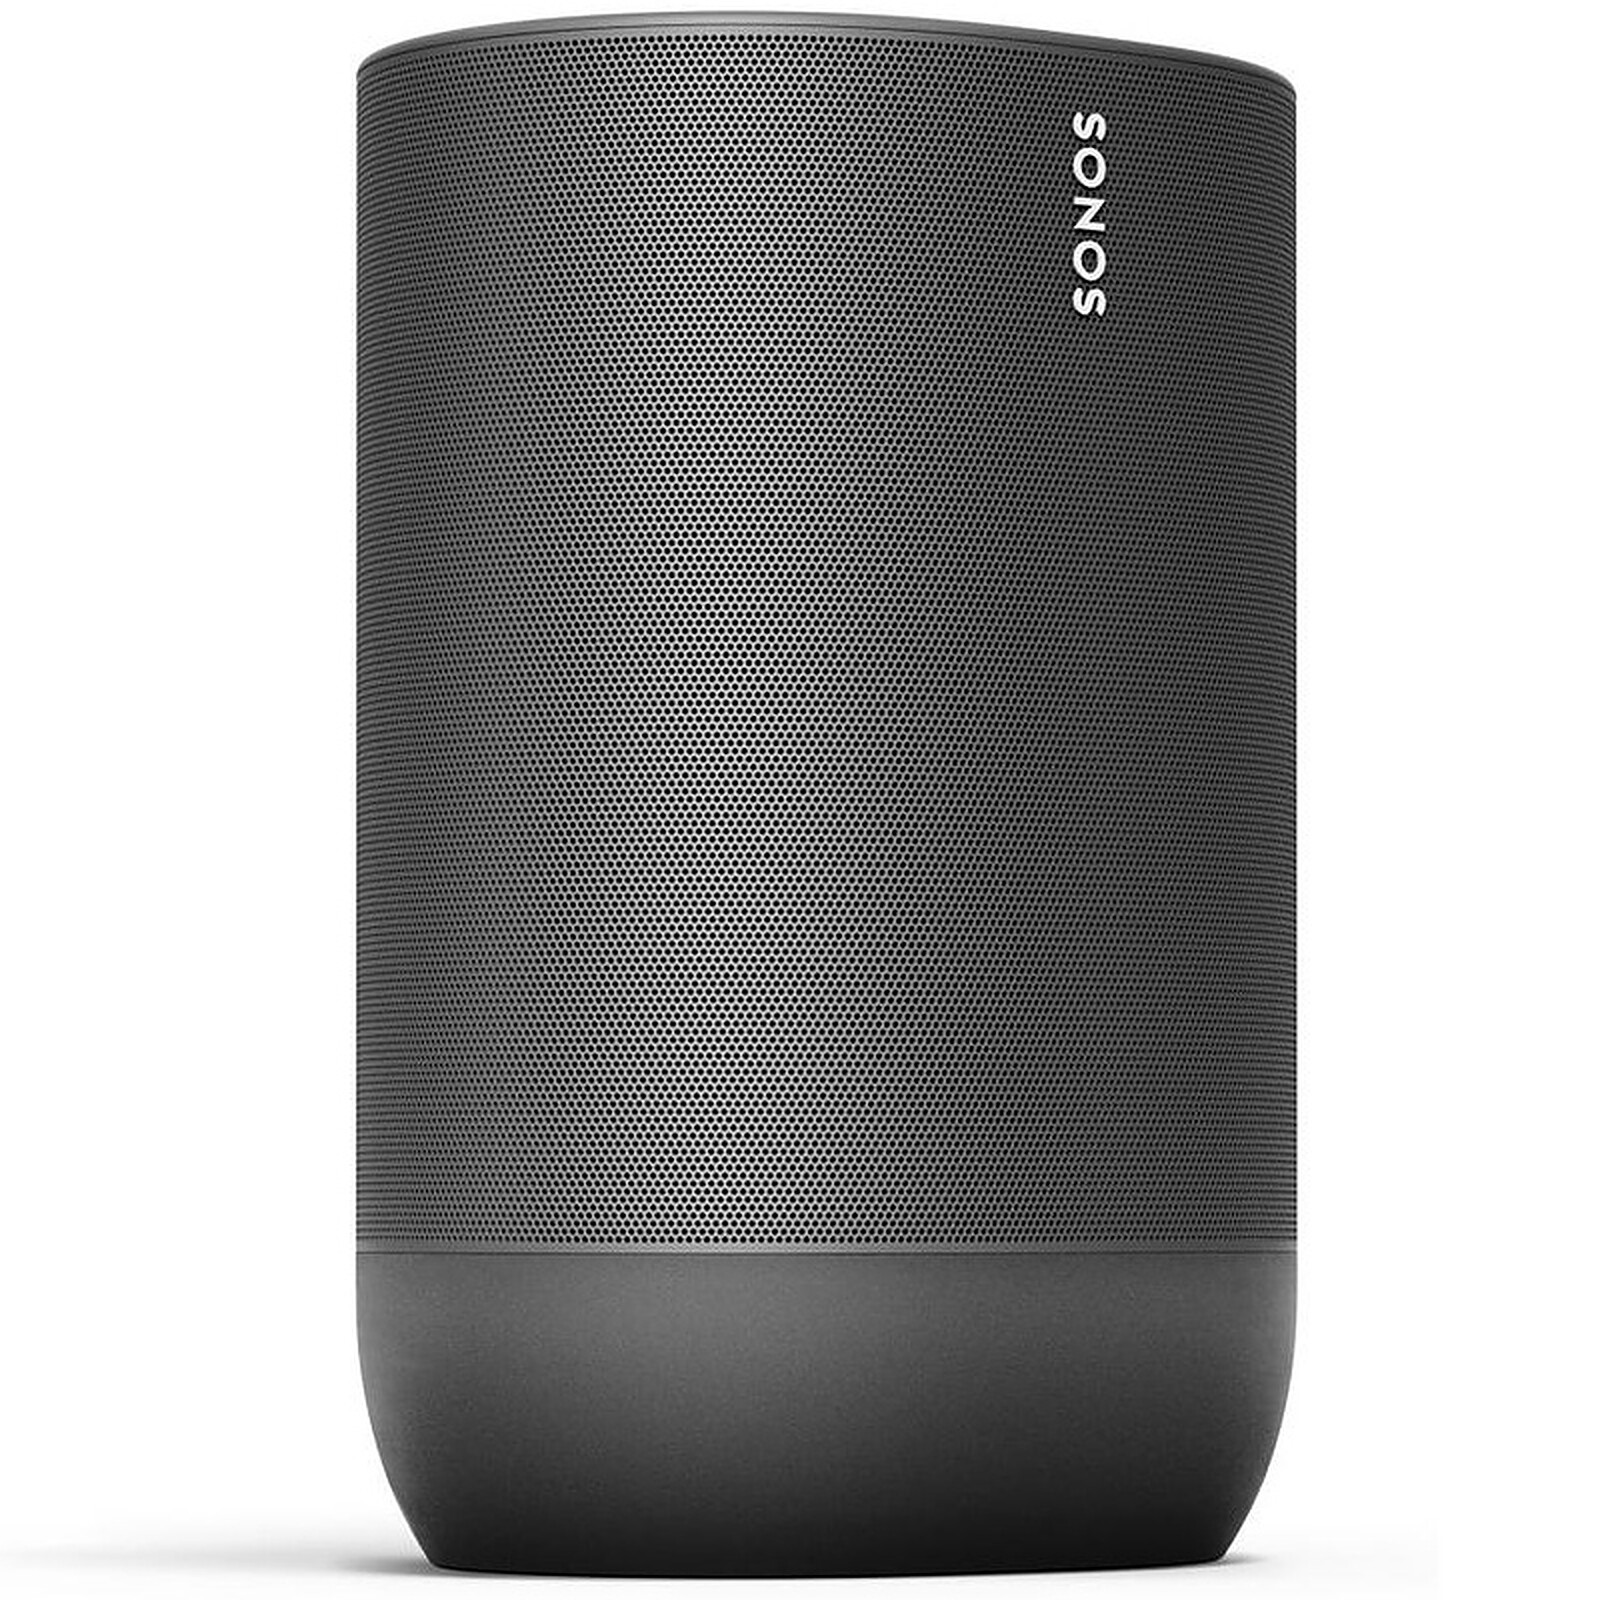 Move - Network Audio streaming Sonos on LDLC